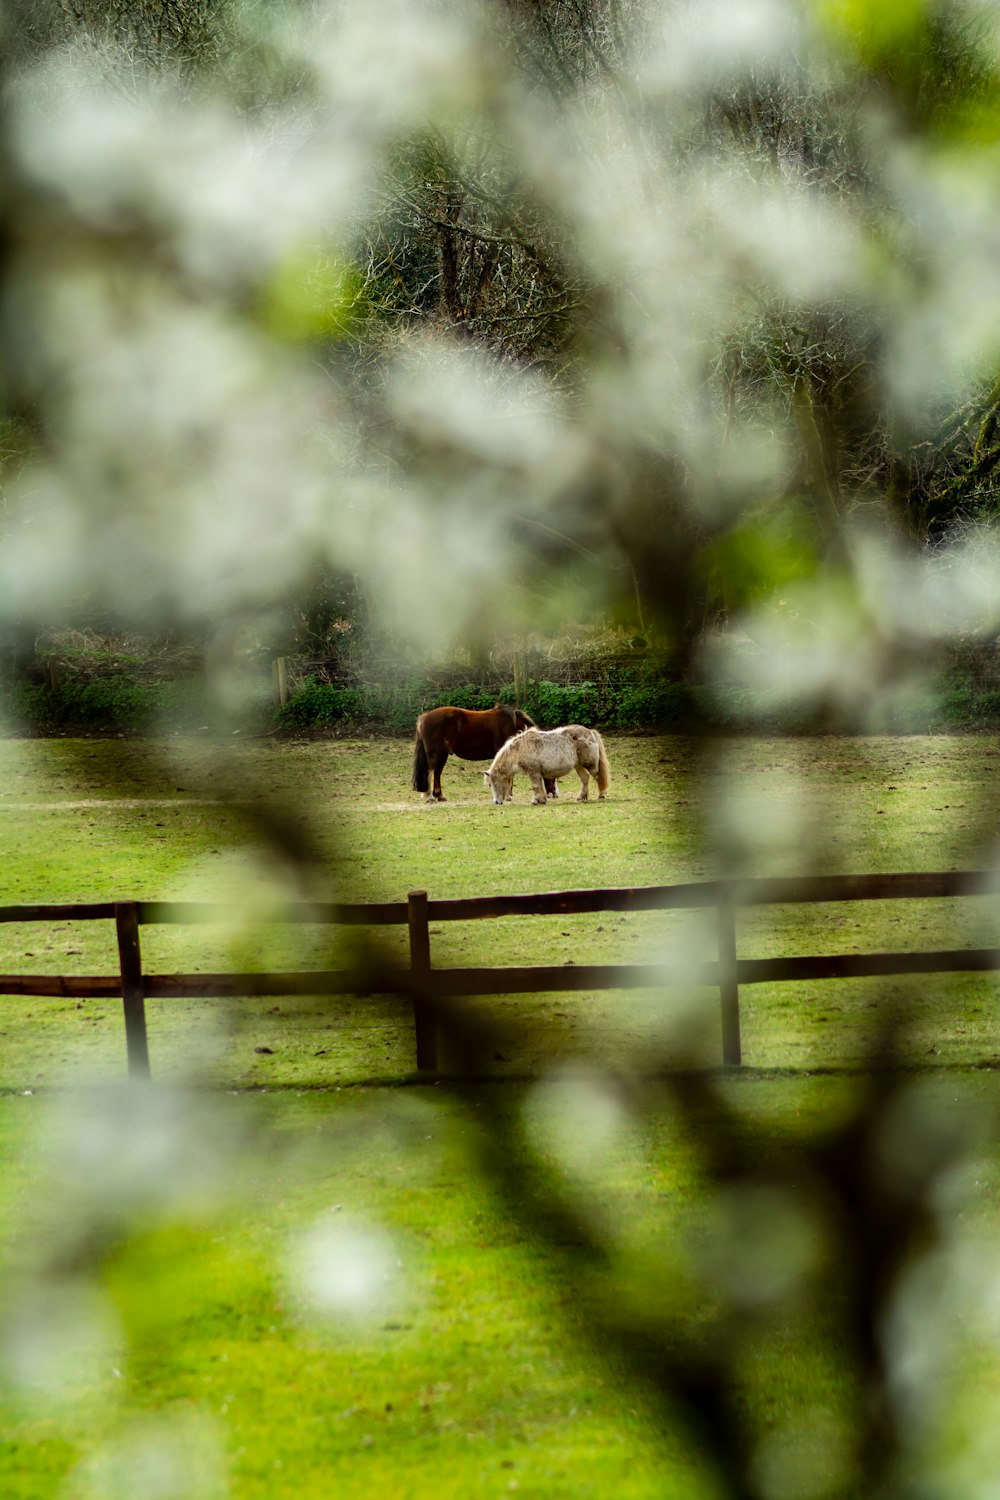 herd of horses on green grass field during daytime